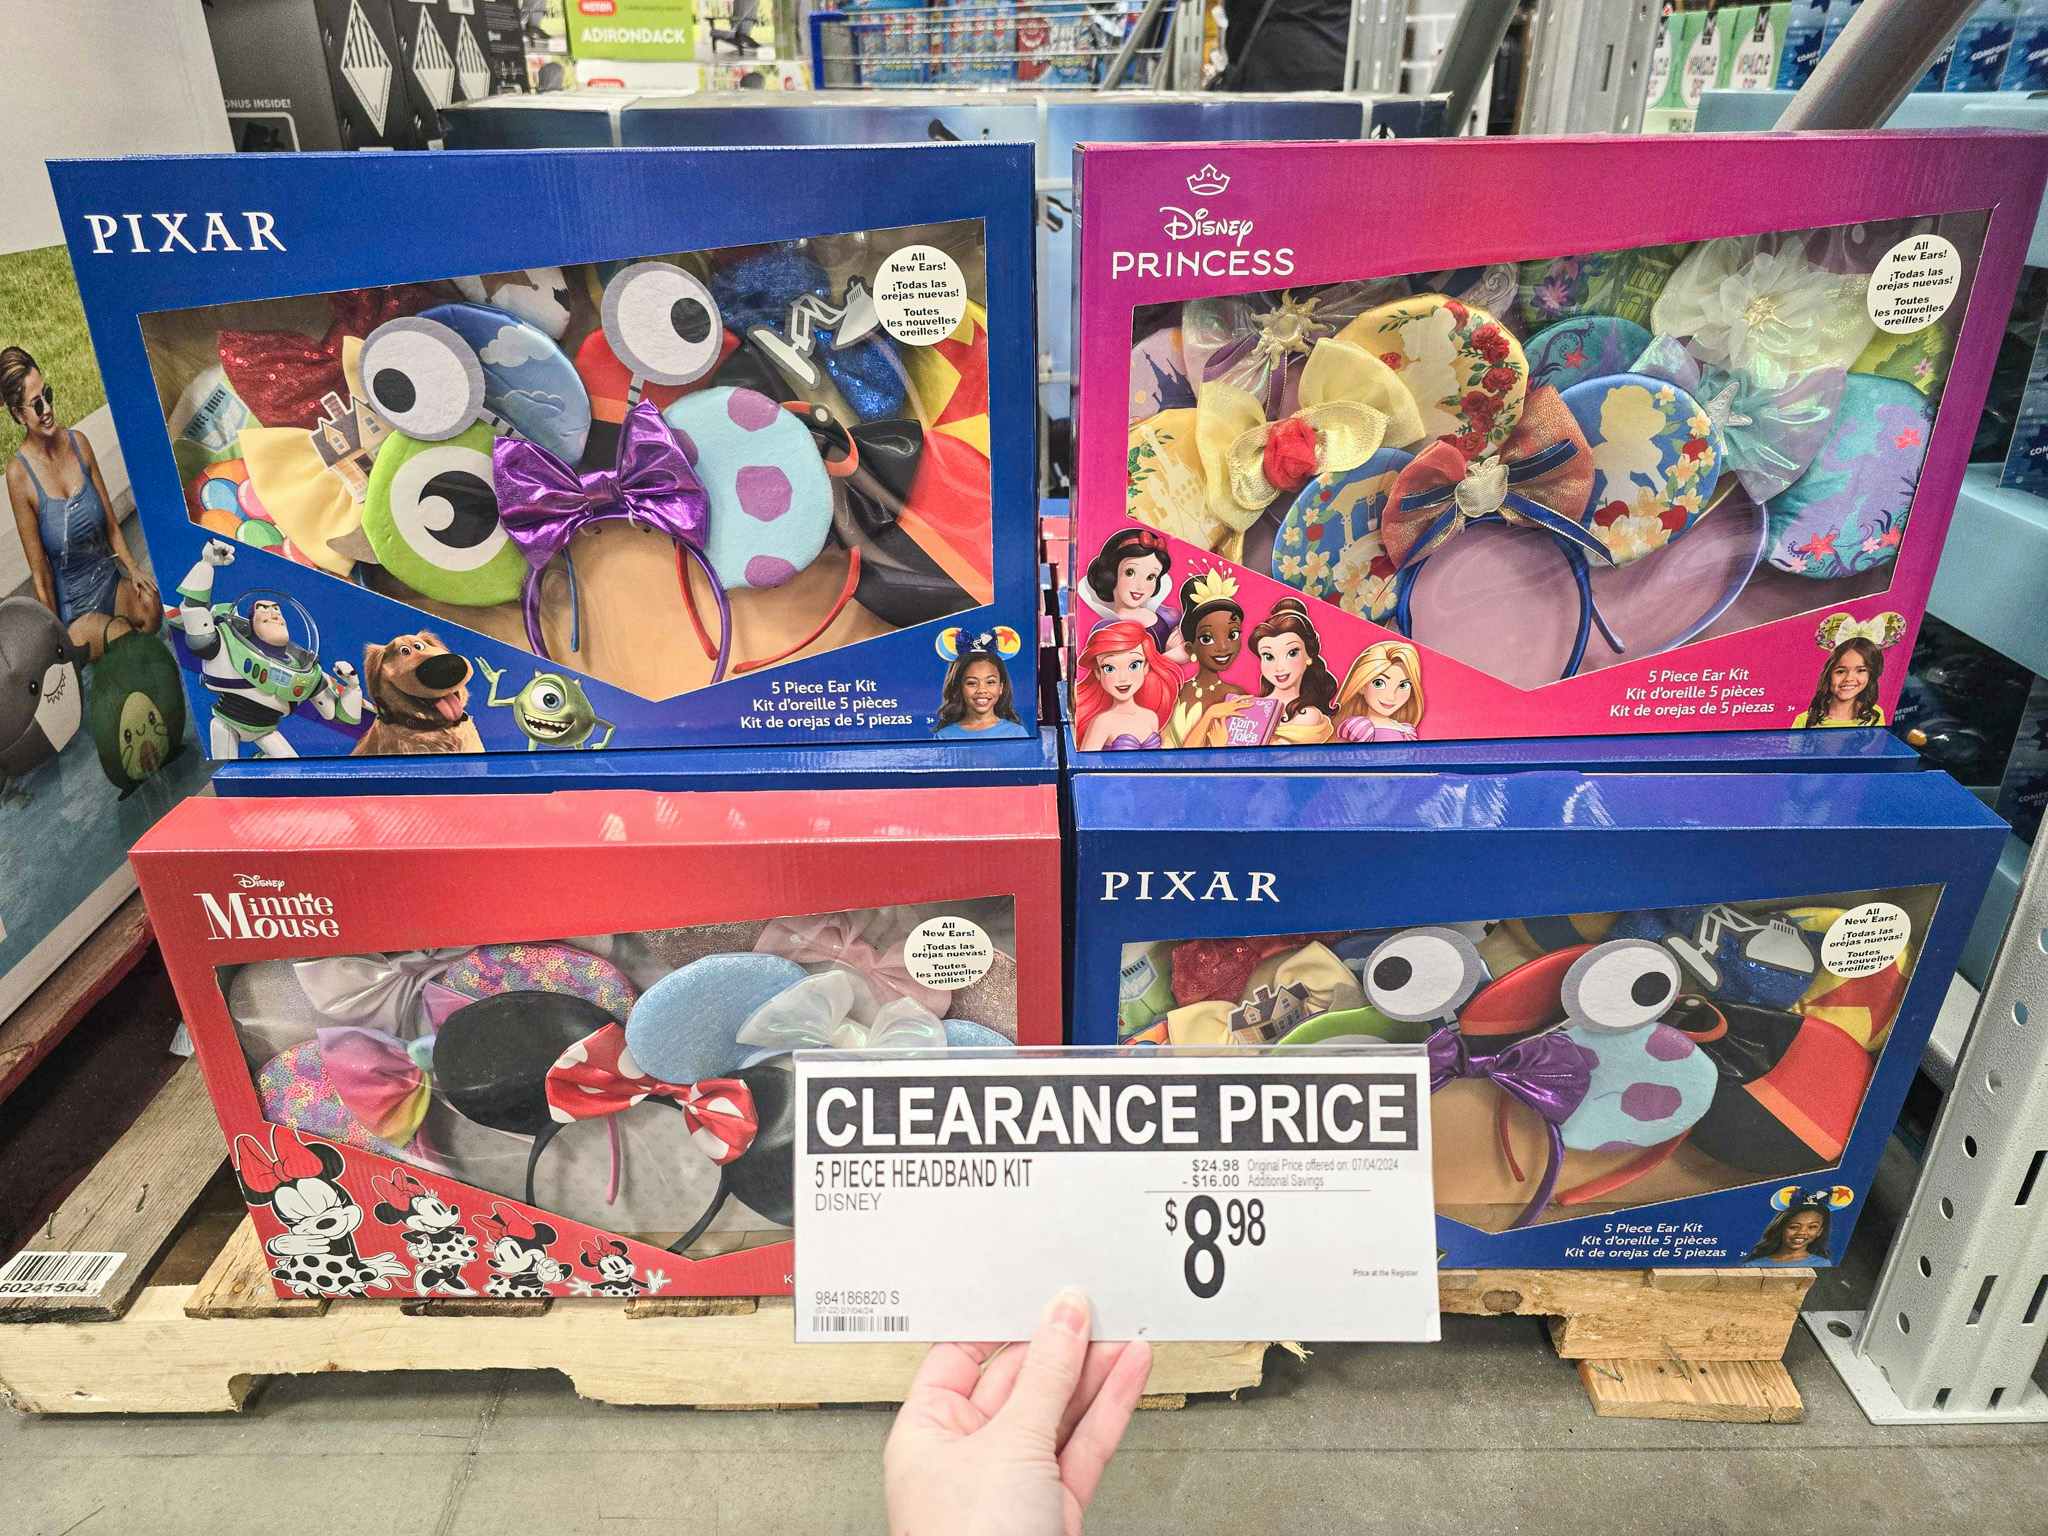 person holding a clearance sign for $8.98 in front of sets of disney ears